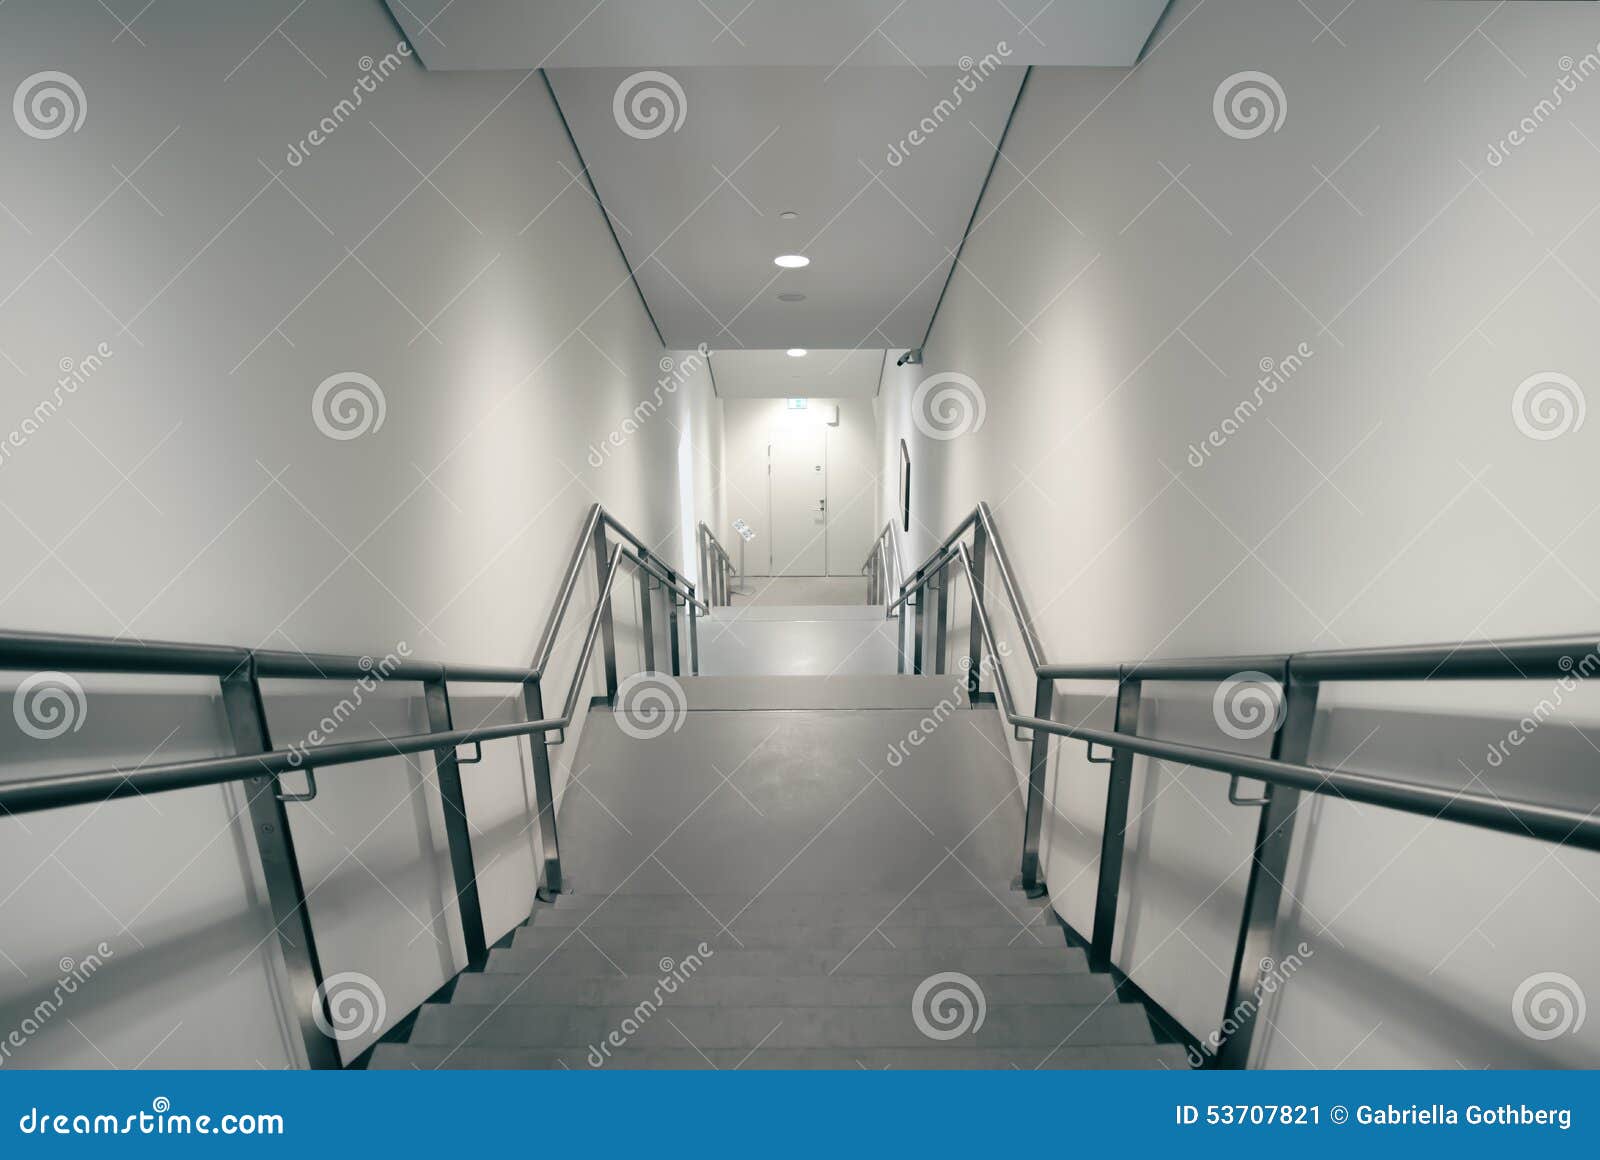 stairs leading down to emergency exit